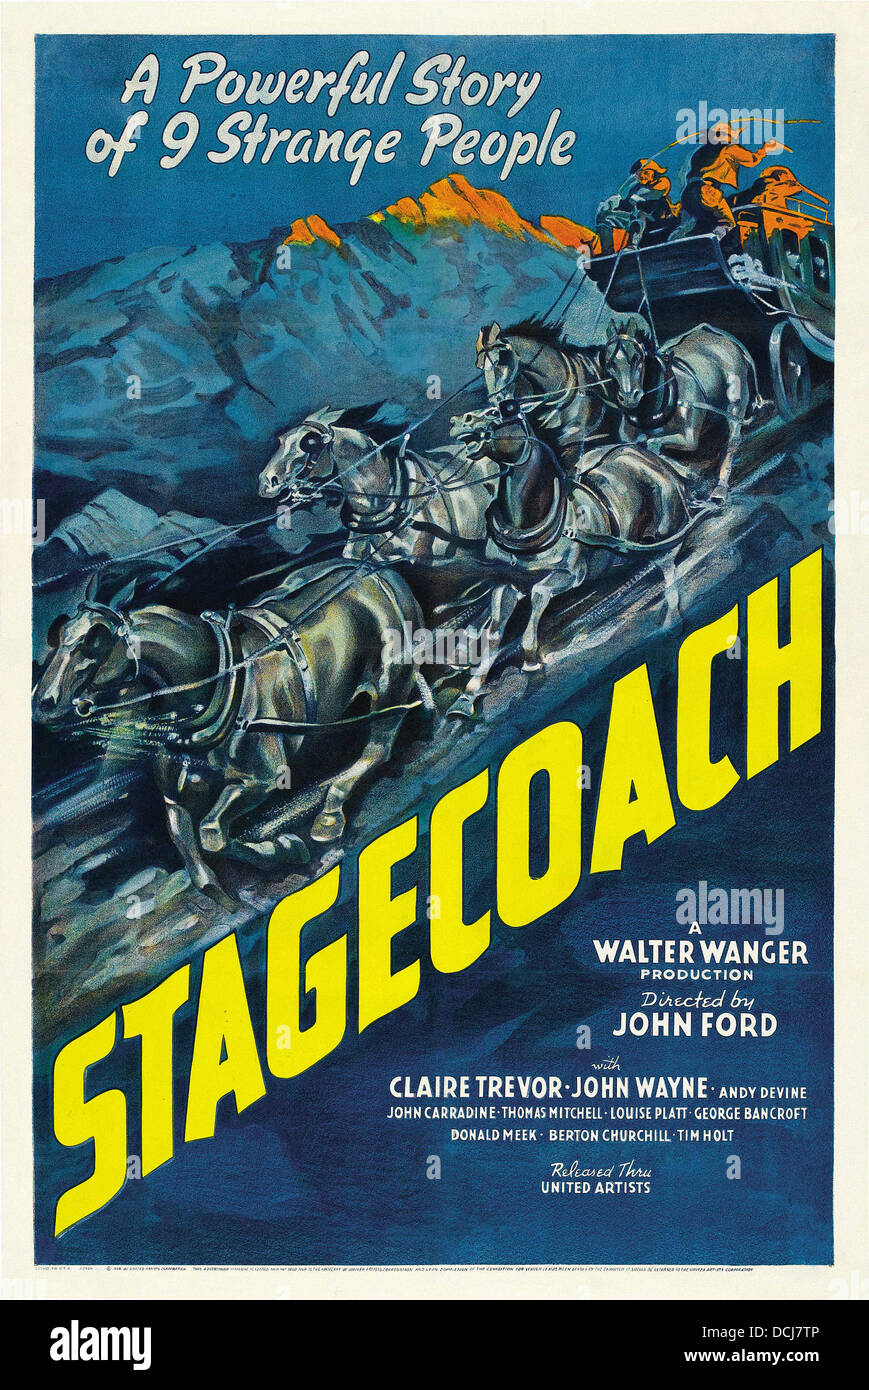 STAGECOACH - movie poster - Directed by John Ford - United Artists 1939 Stock Photo